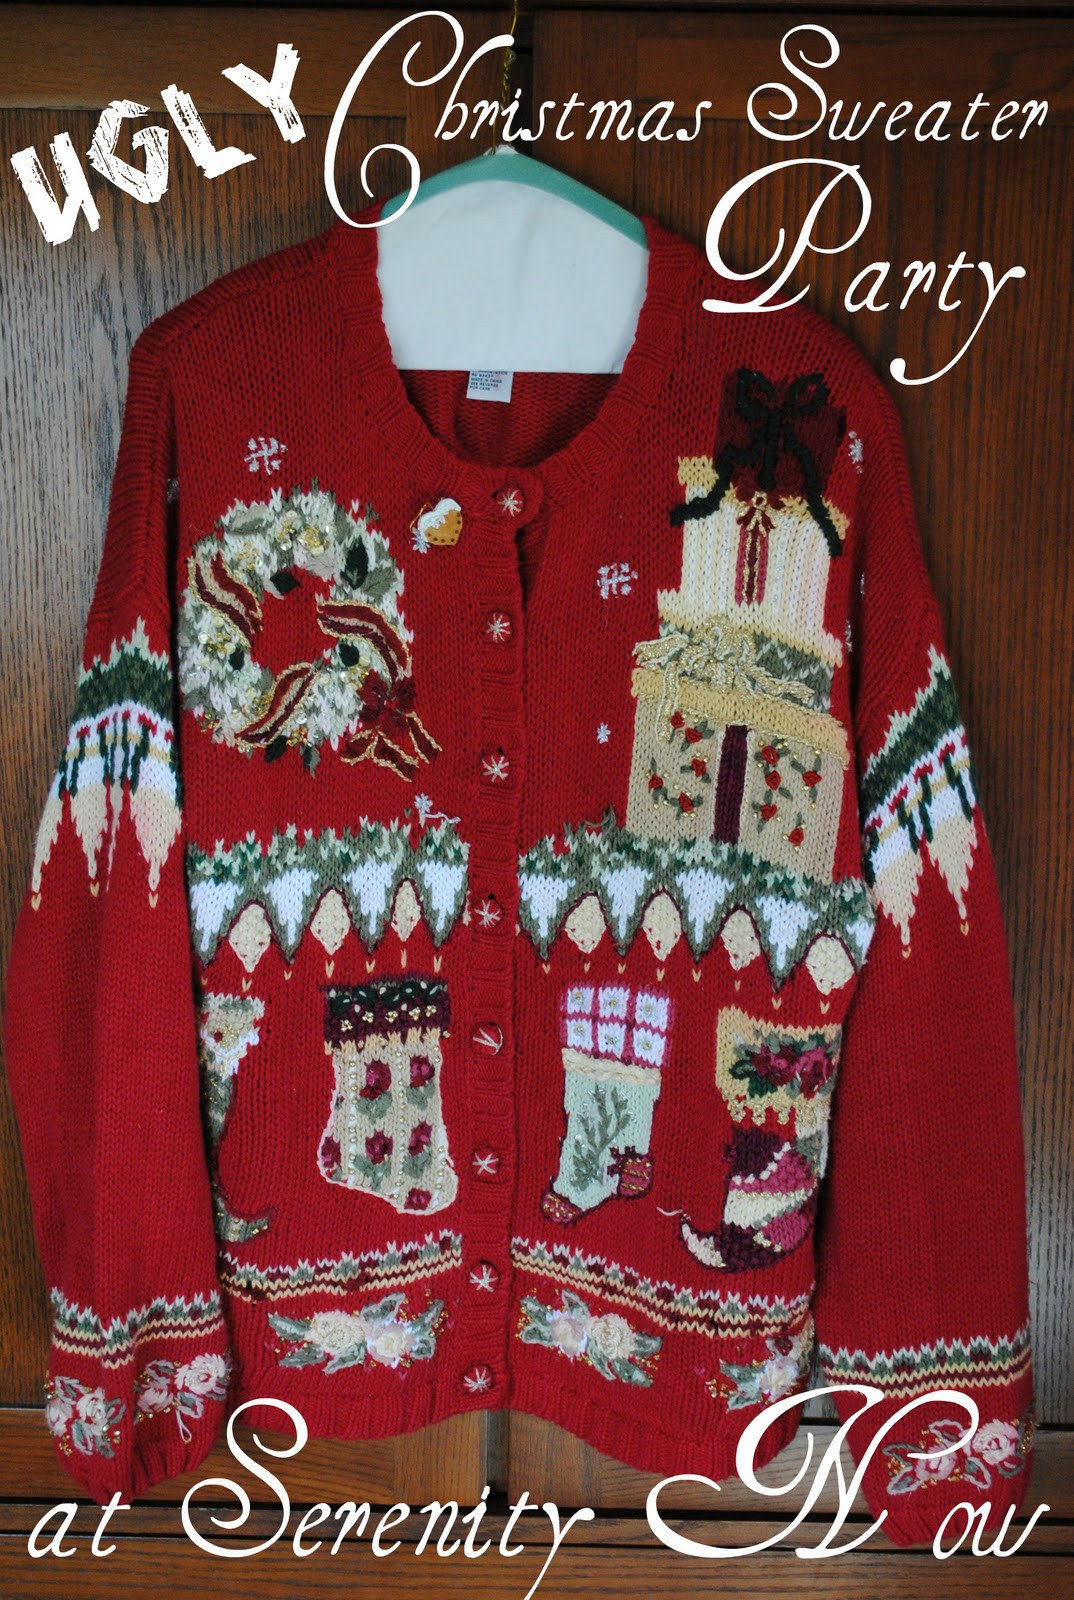 Ugly Sweater Ideas For Christmas Parties
 Serenity Now Girls Night In for the Holidays